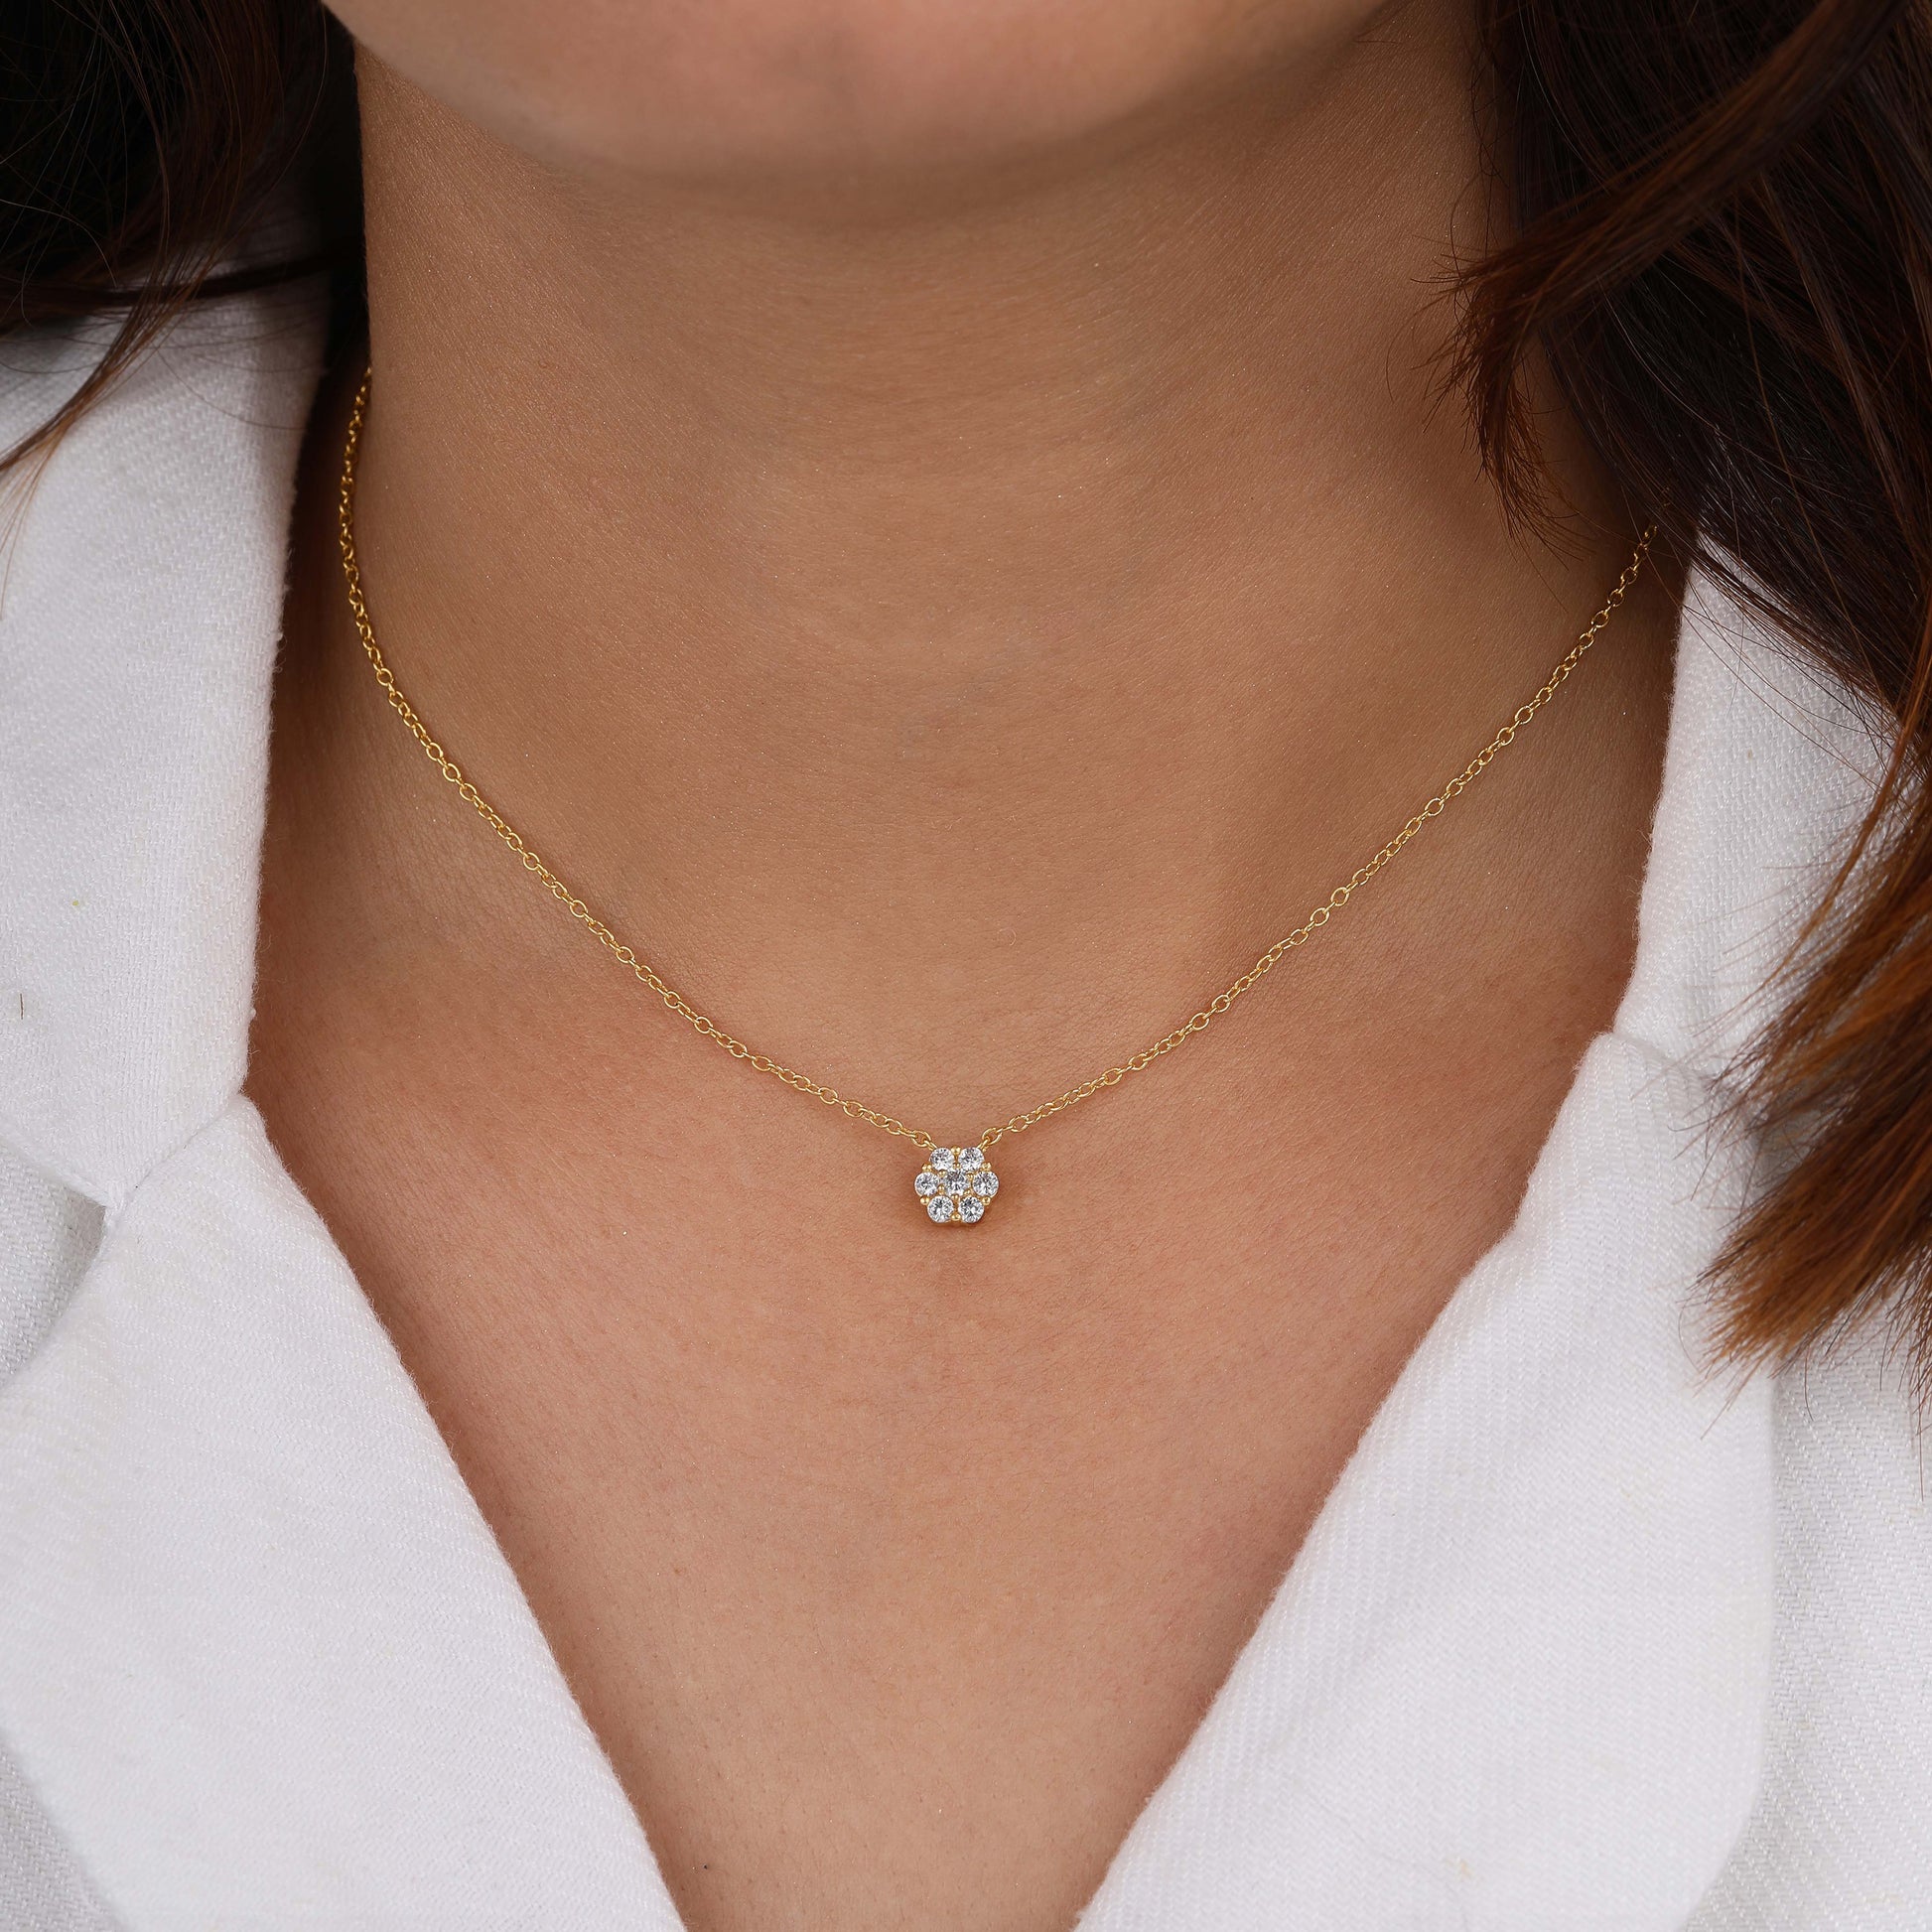 Diamond necklace with gold chain on neck